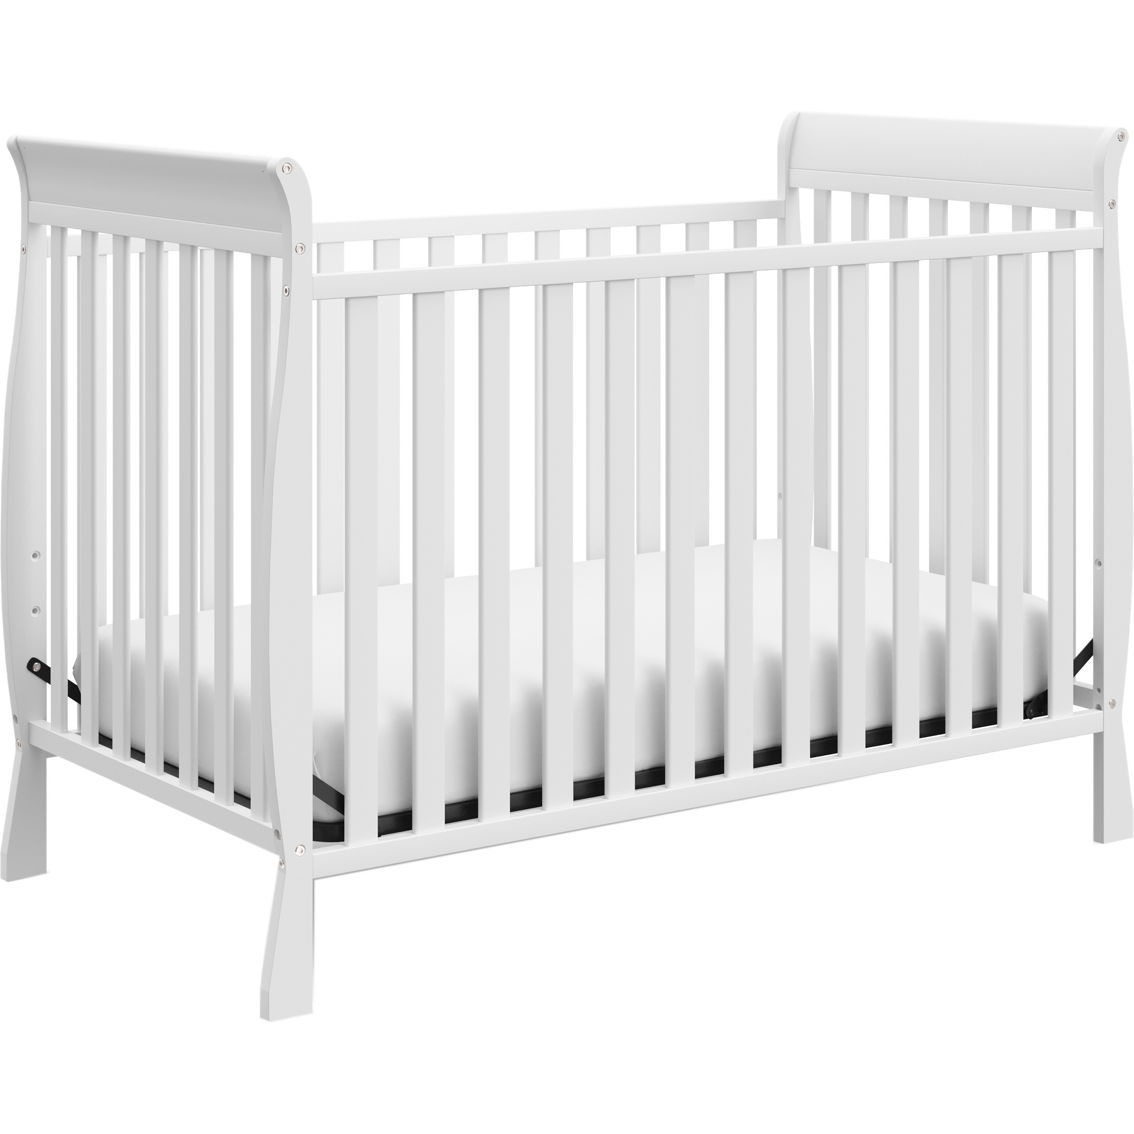 Storkcraft Maxwell 3-in-1 Convertible Crib - Image 2 of 7